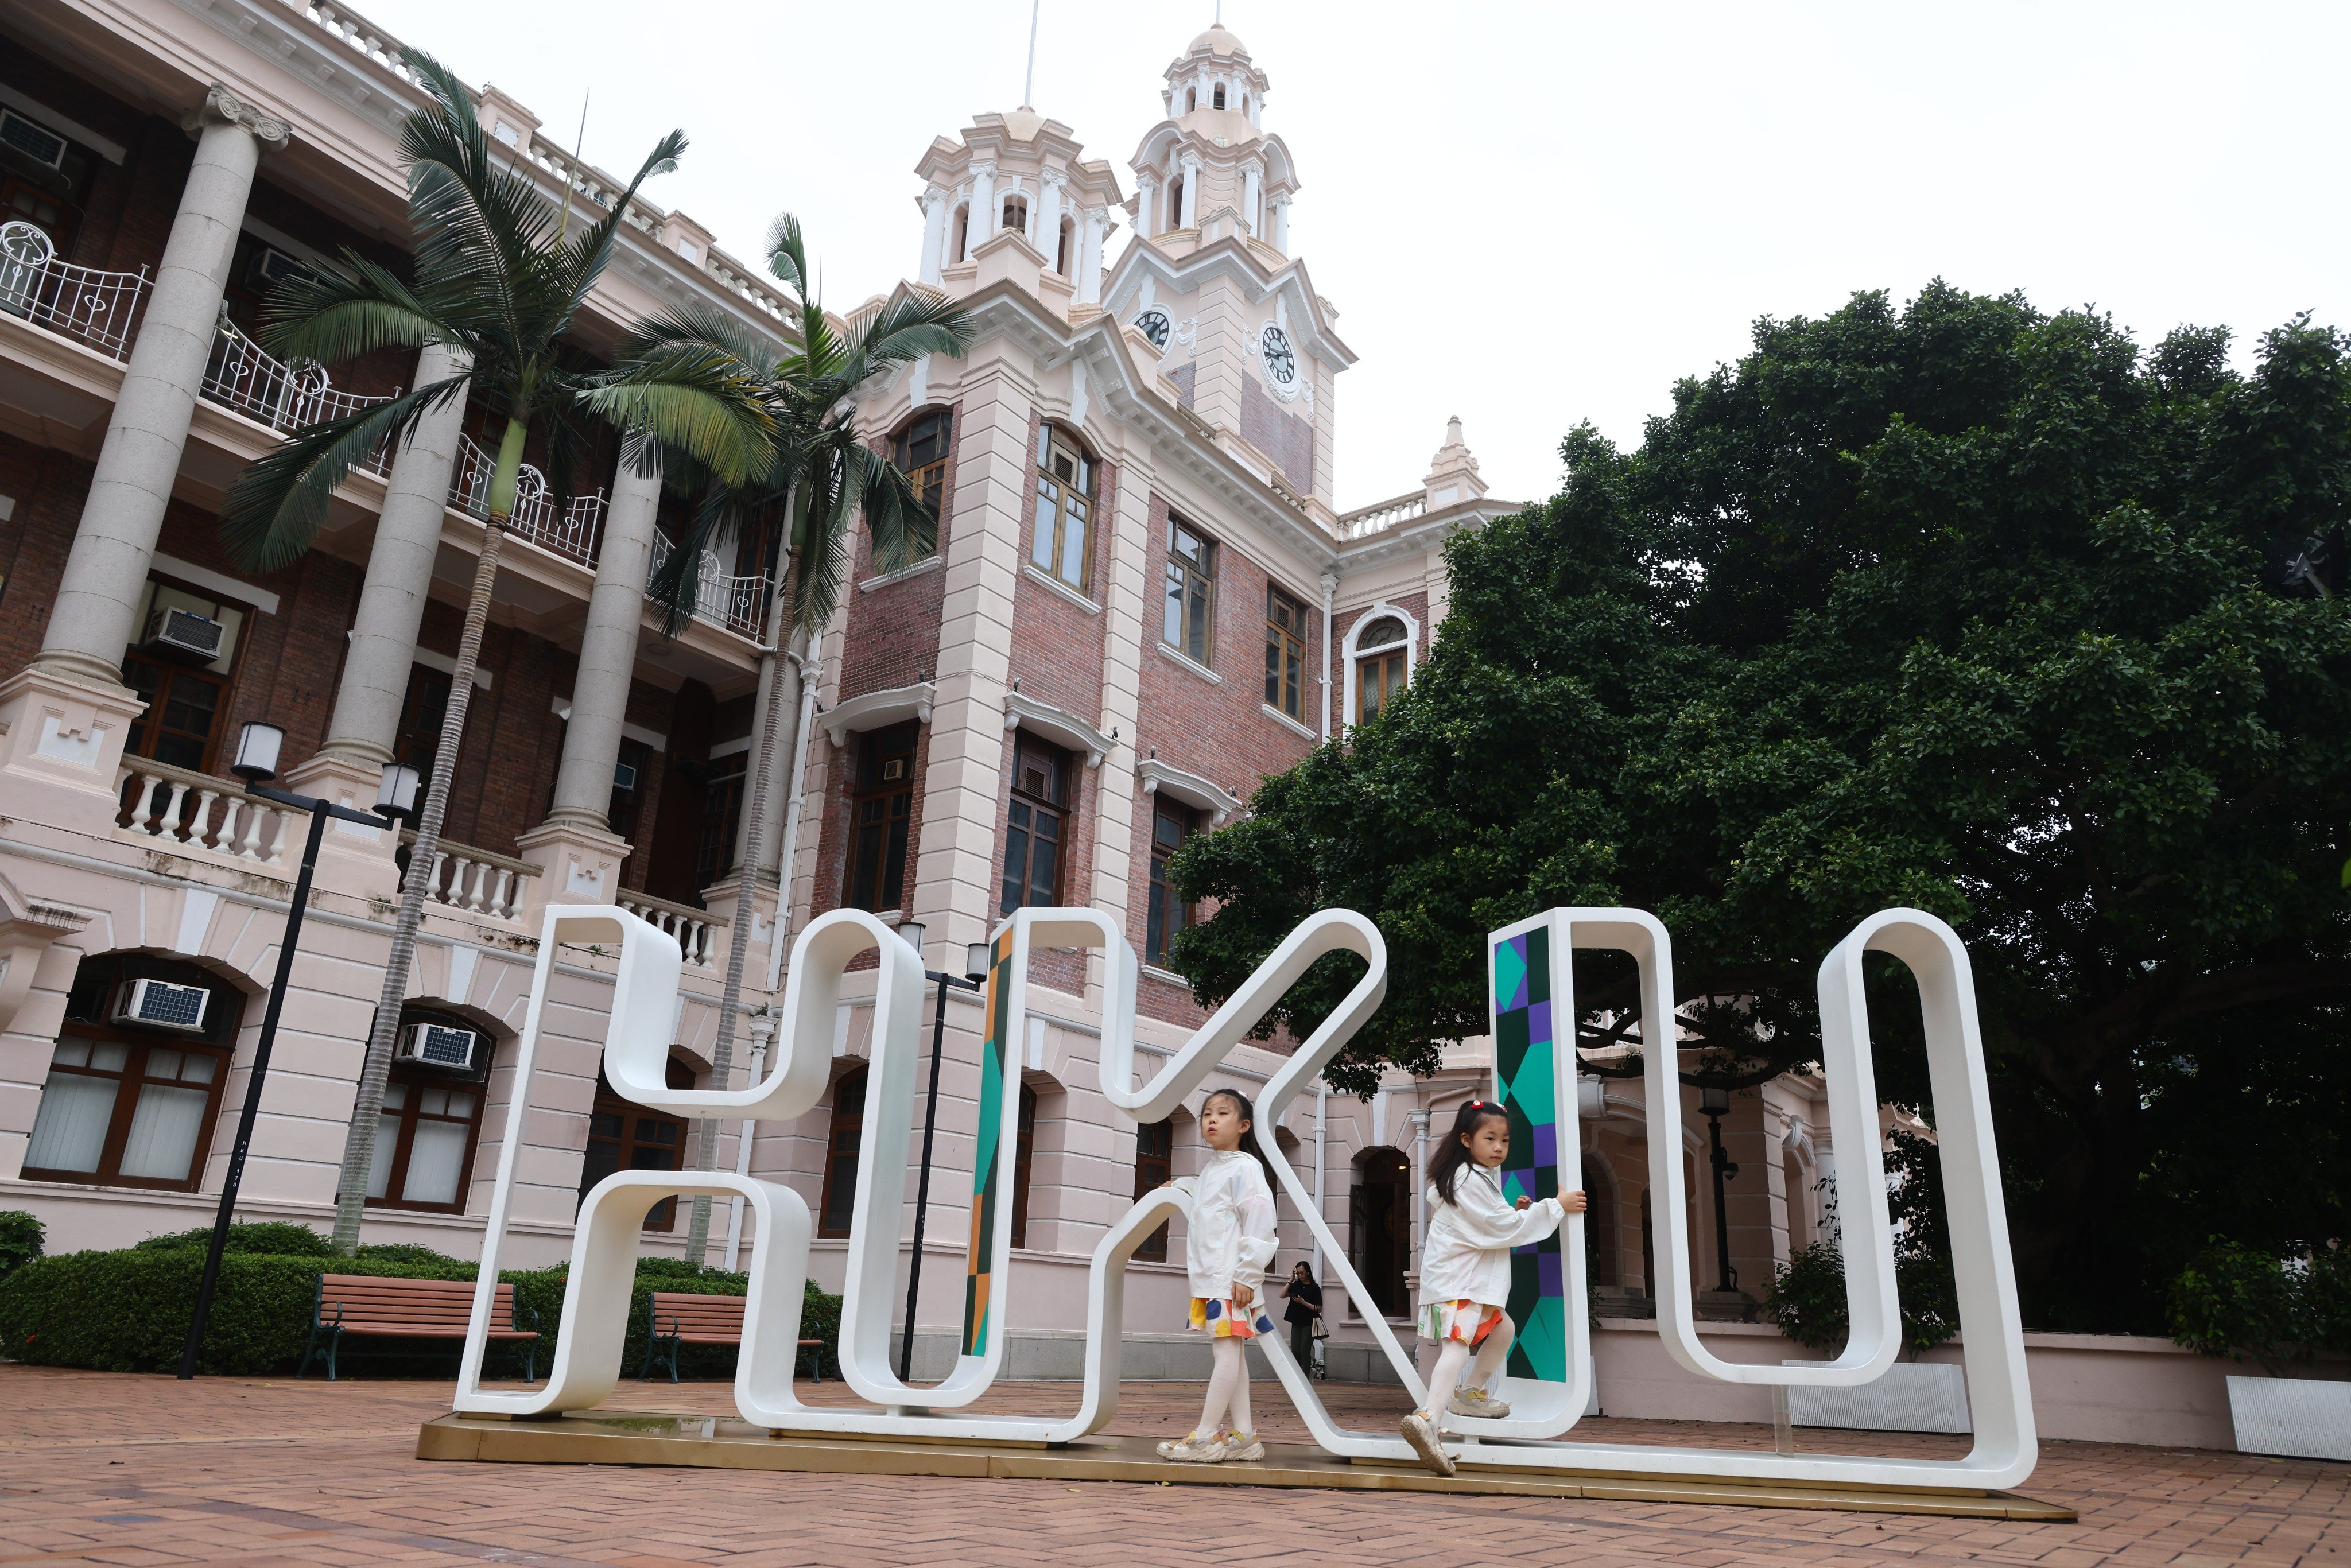 A view of HKU on June 4, when it was named as 17th in the world in the annual Quacquarelli Symonds (QS) university rankings. Photo: Dickson Lee